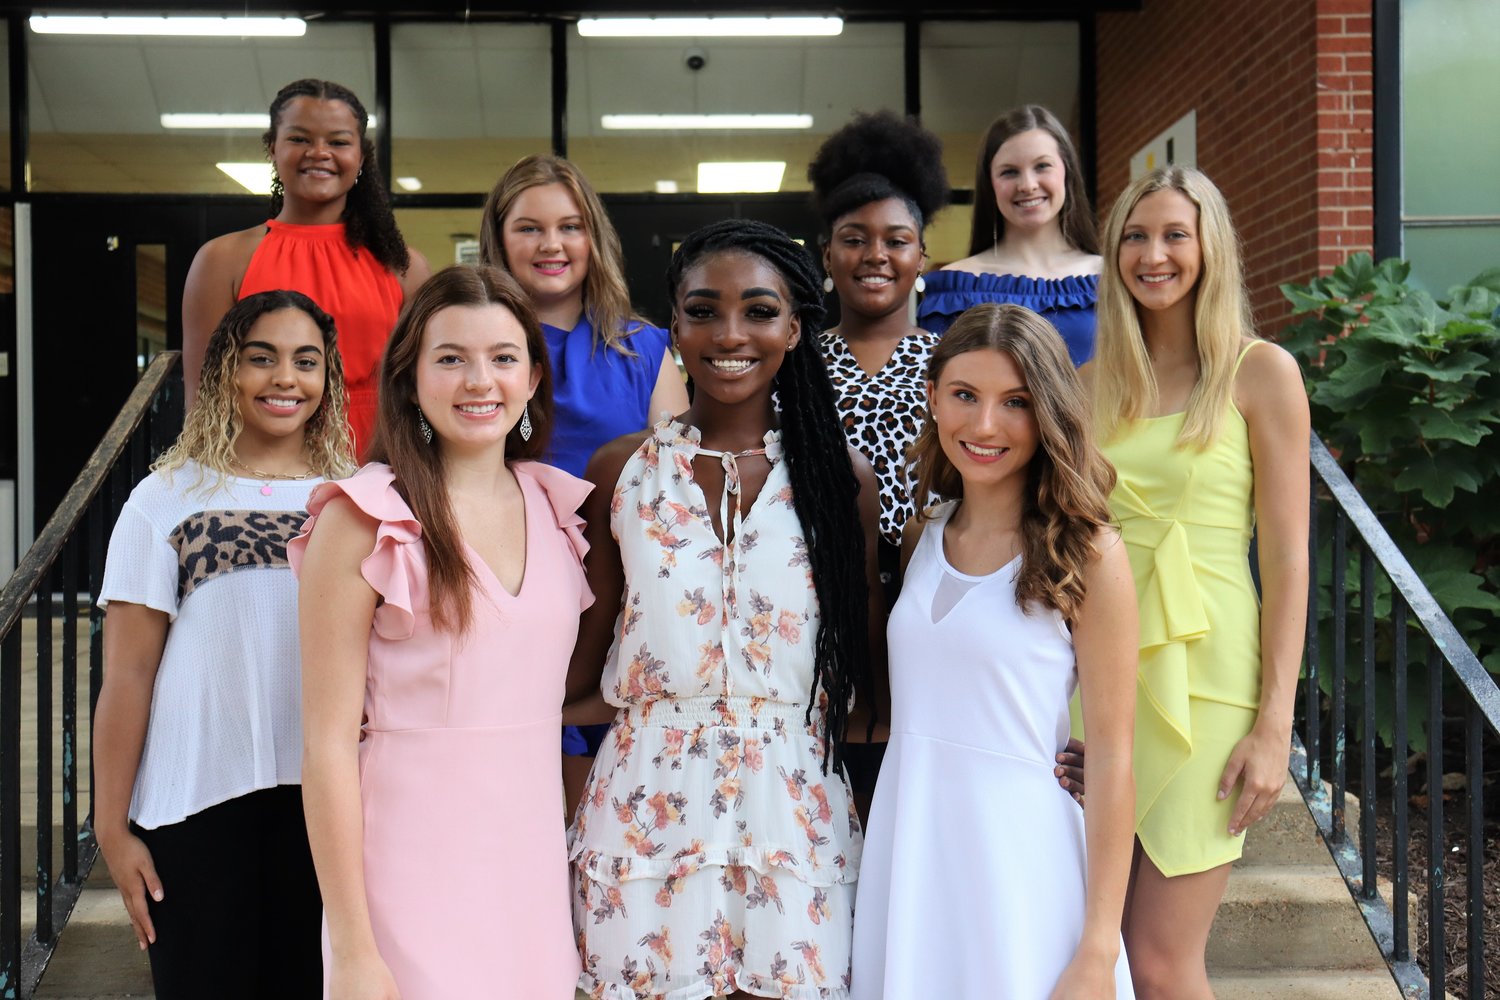 Union High School Court named